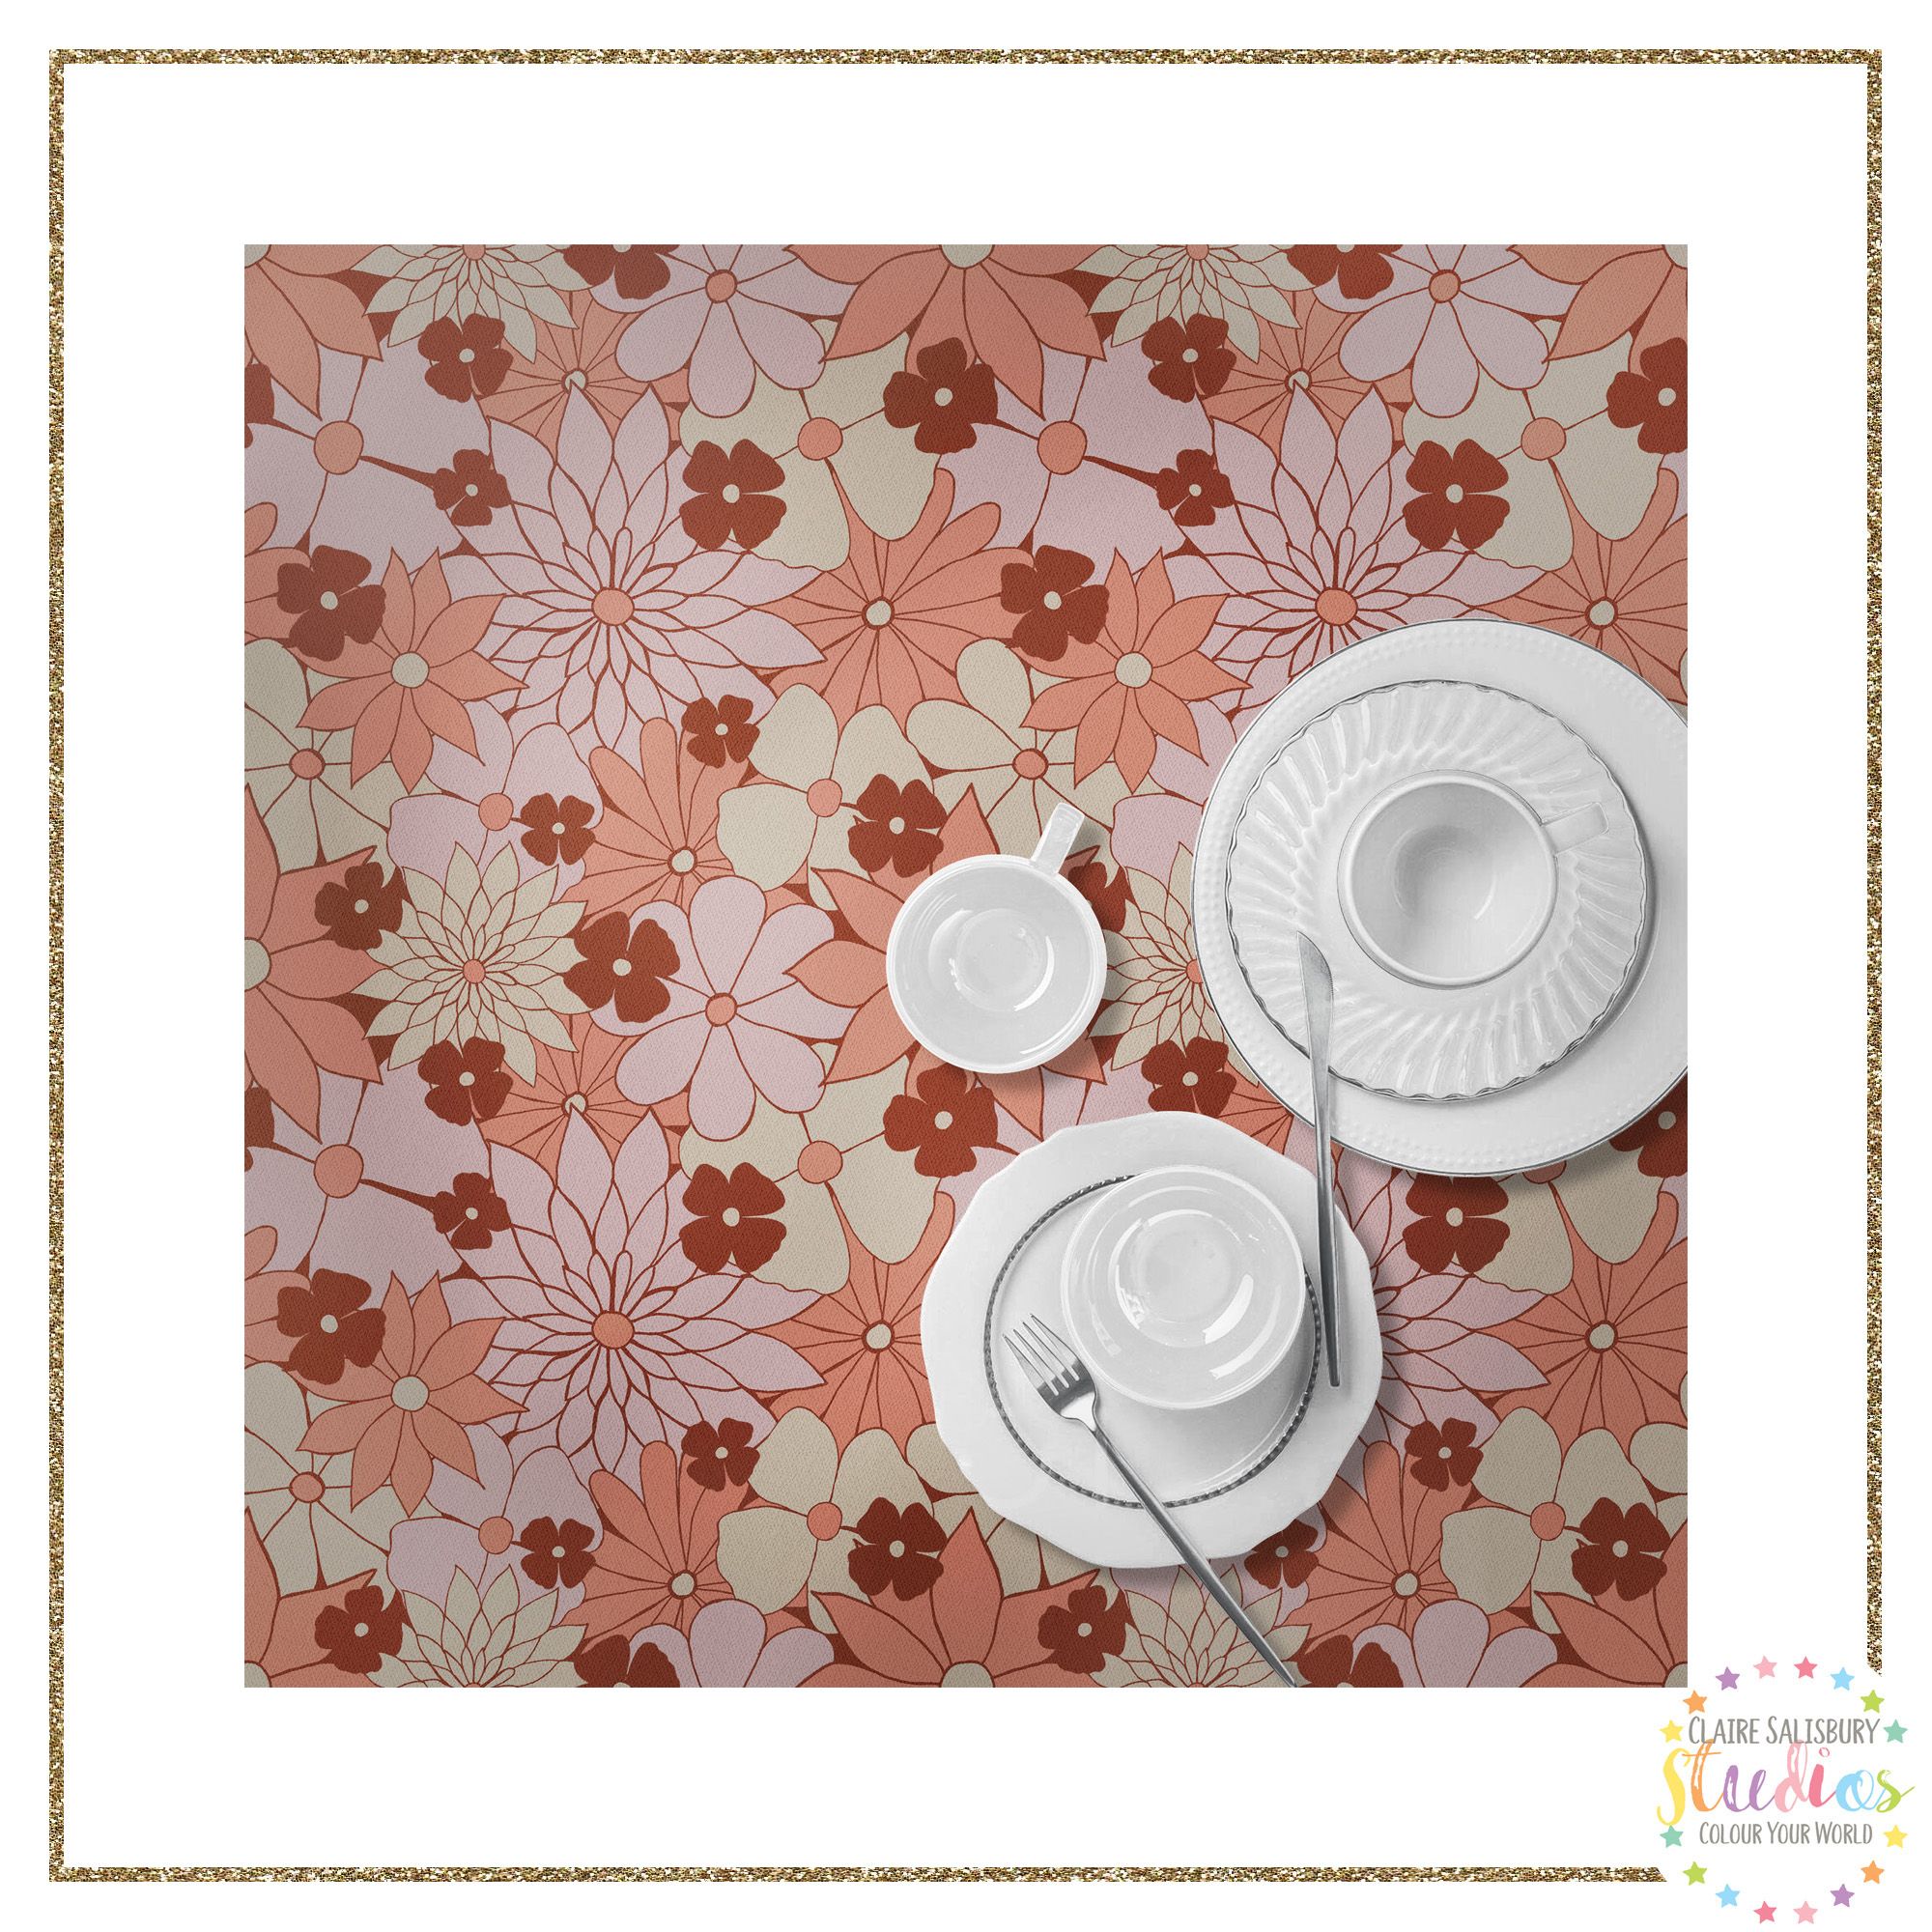 TABLECLOTH SQUARE BACKGROUND.jpg